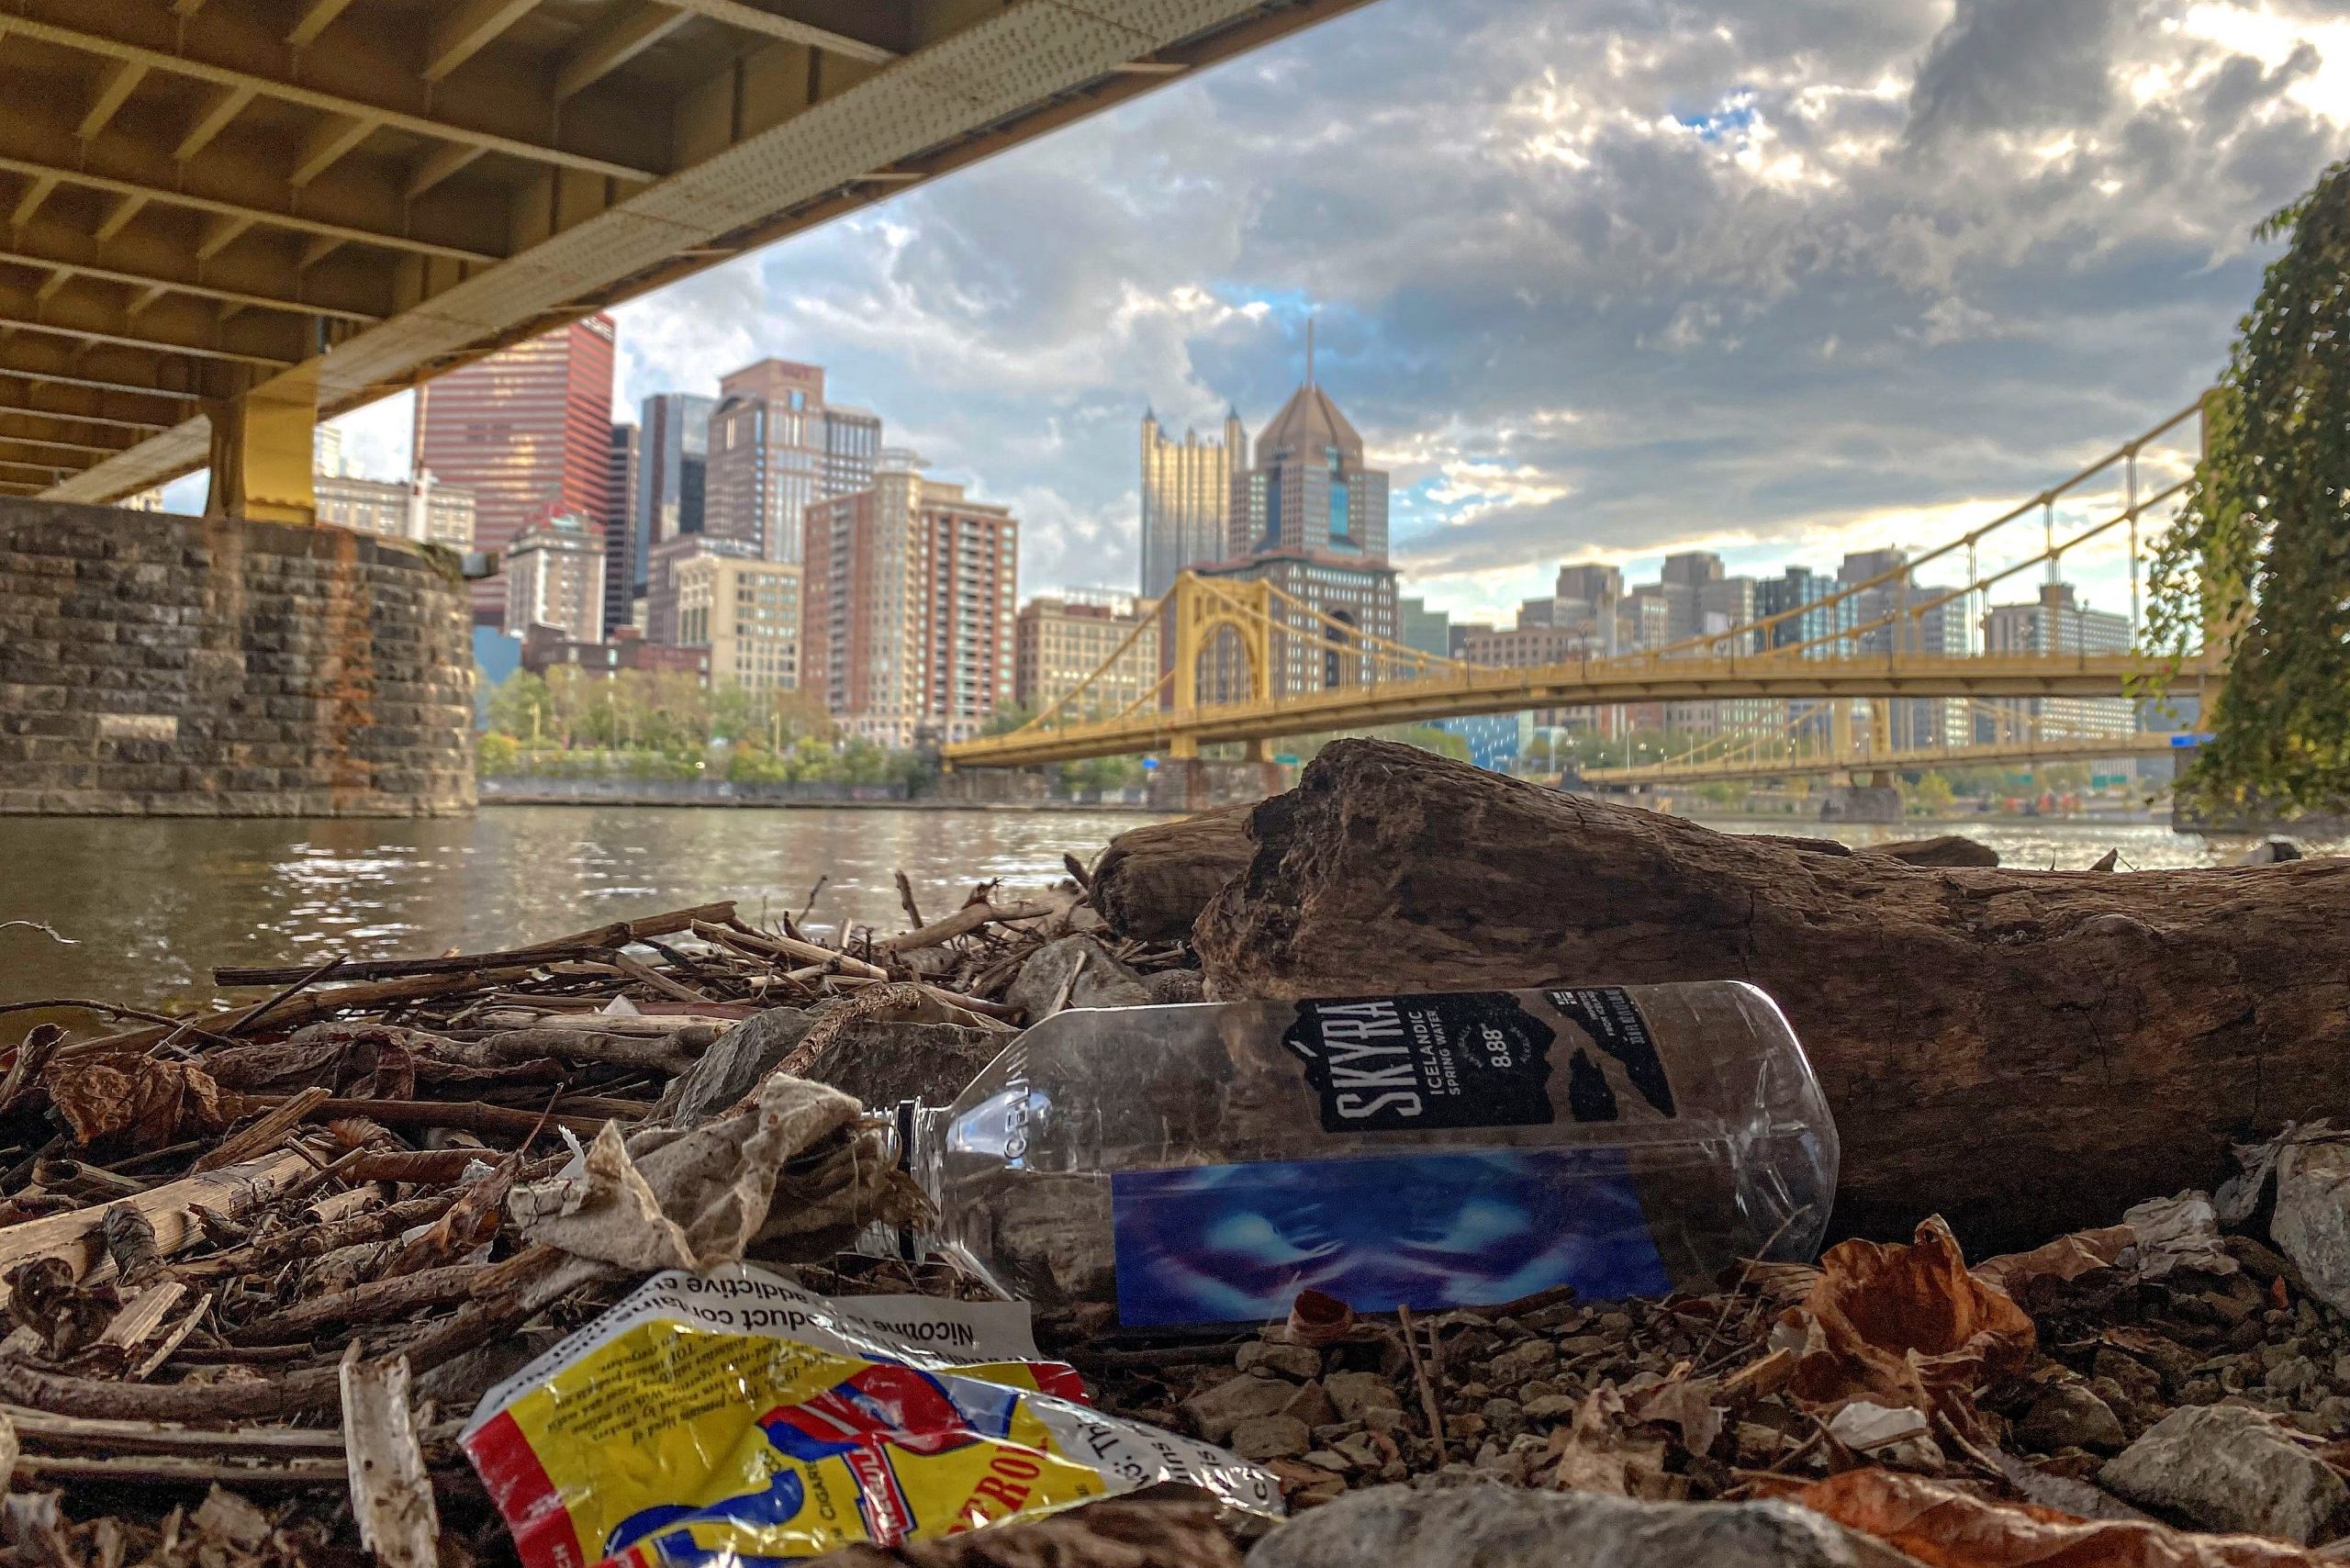 A view of Downtown Pittsburgh from under a bridge with litter.